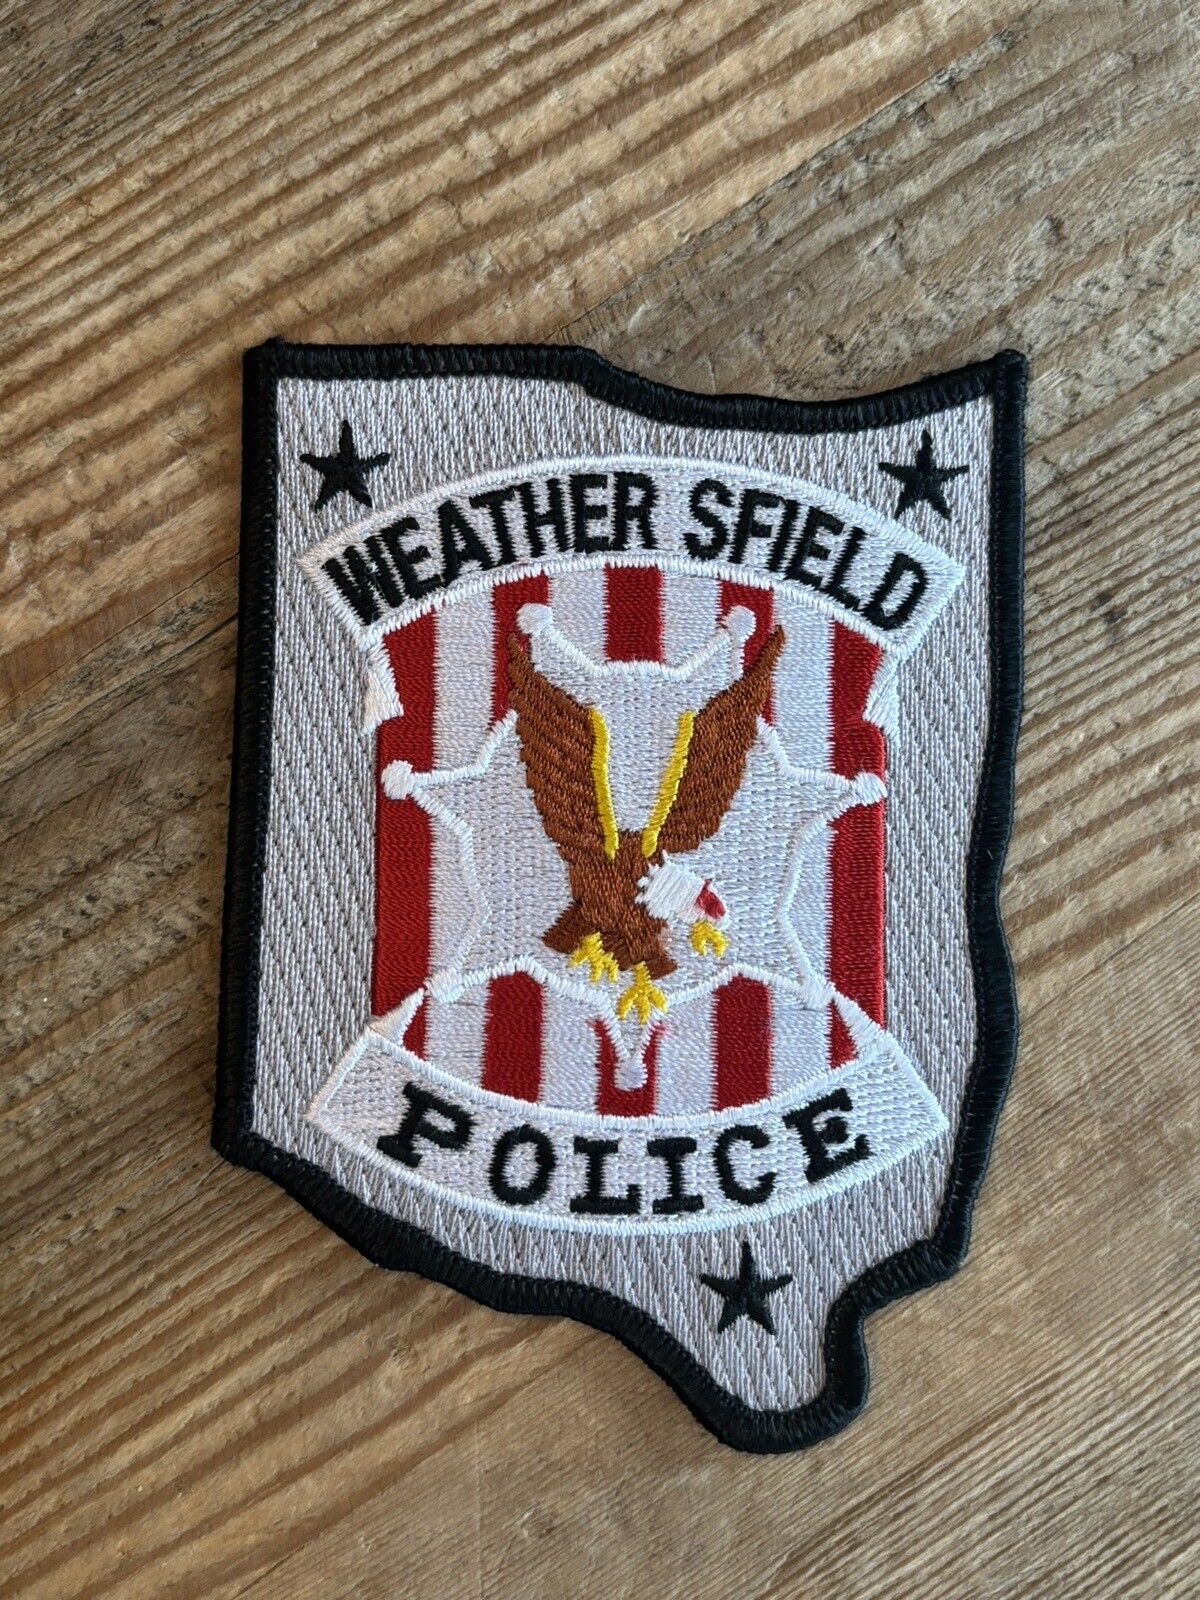 Weathersfield Ohio OH Police Shoulder Patch New Bald Eagle